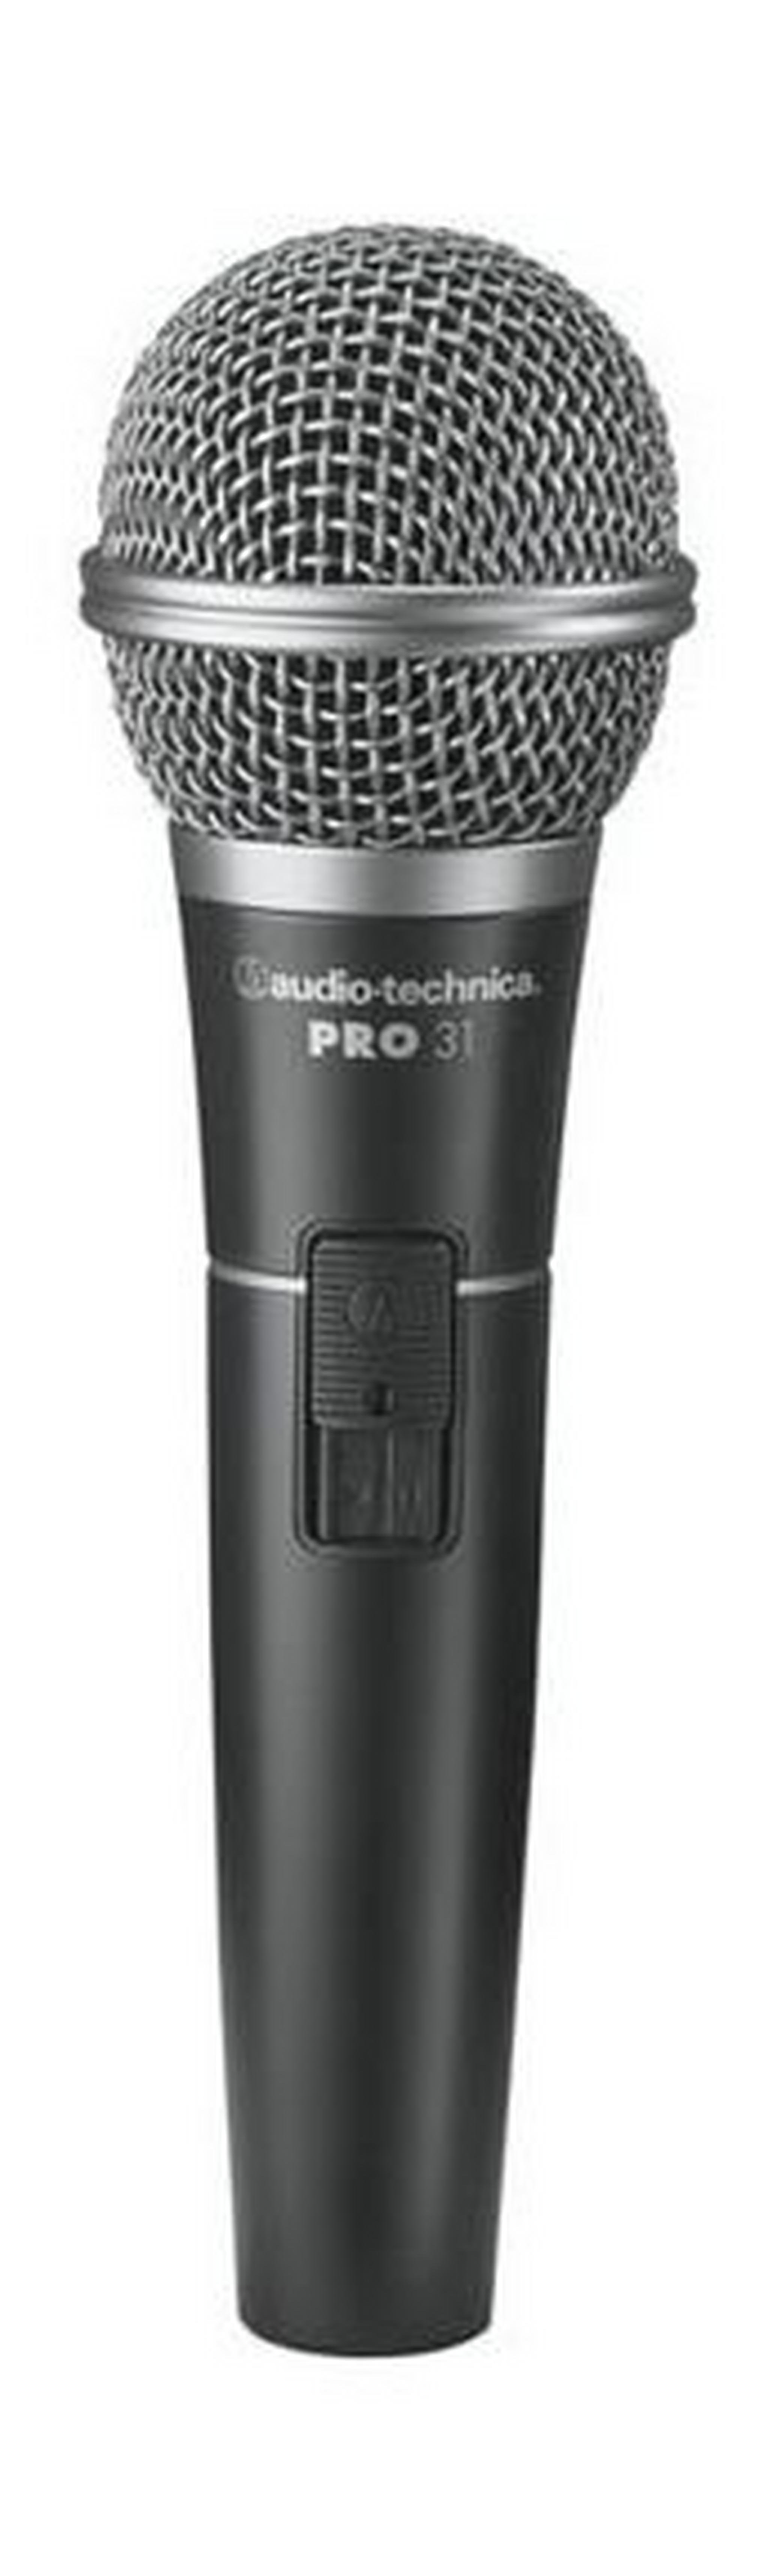 Audio-Technica Pro 31 Cardioid Dynamic Handheld Wired Microphone with XLR to 1/4-inch Cable - Black